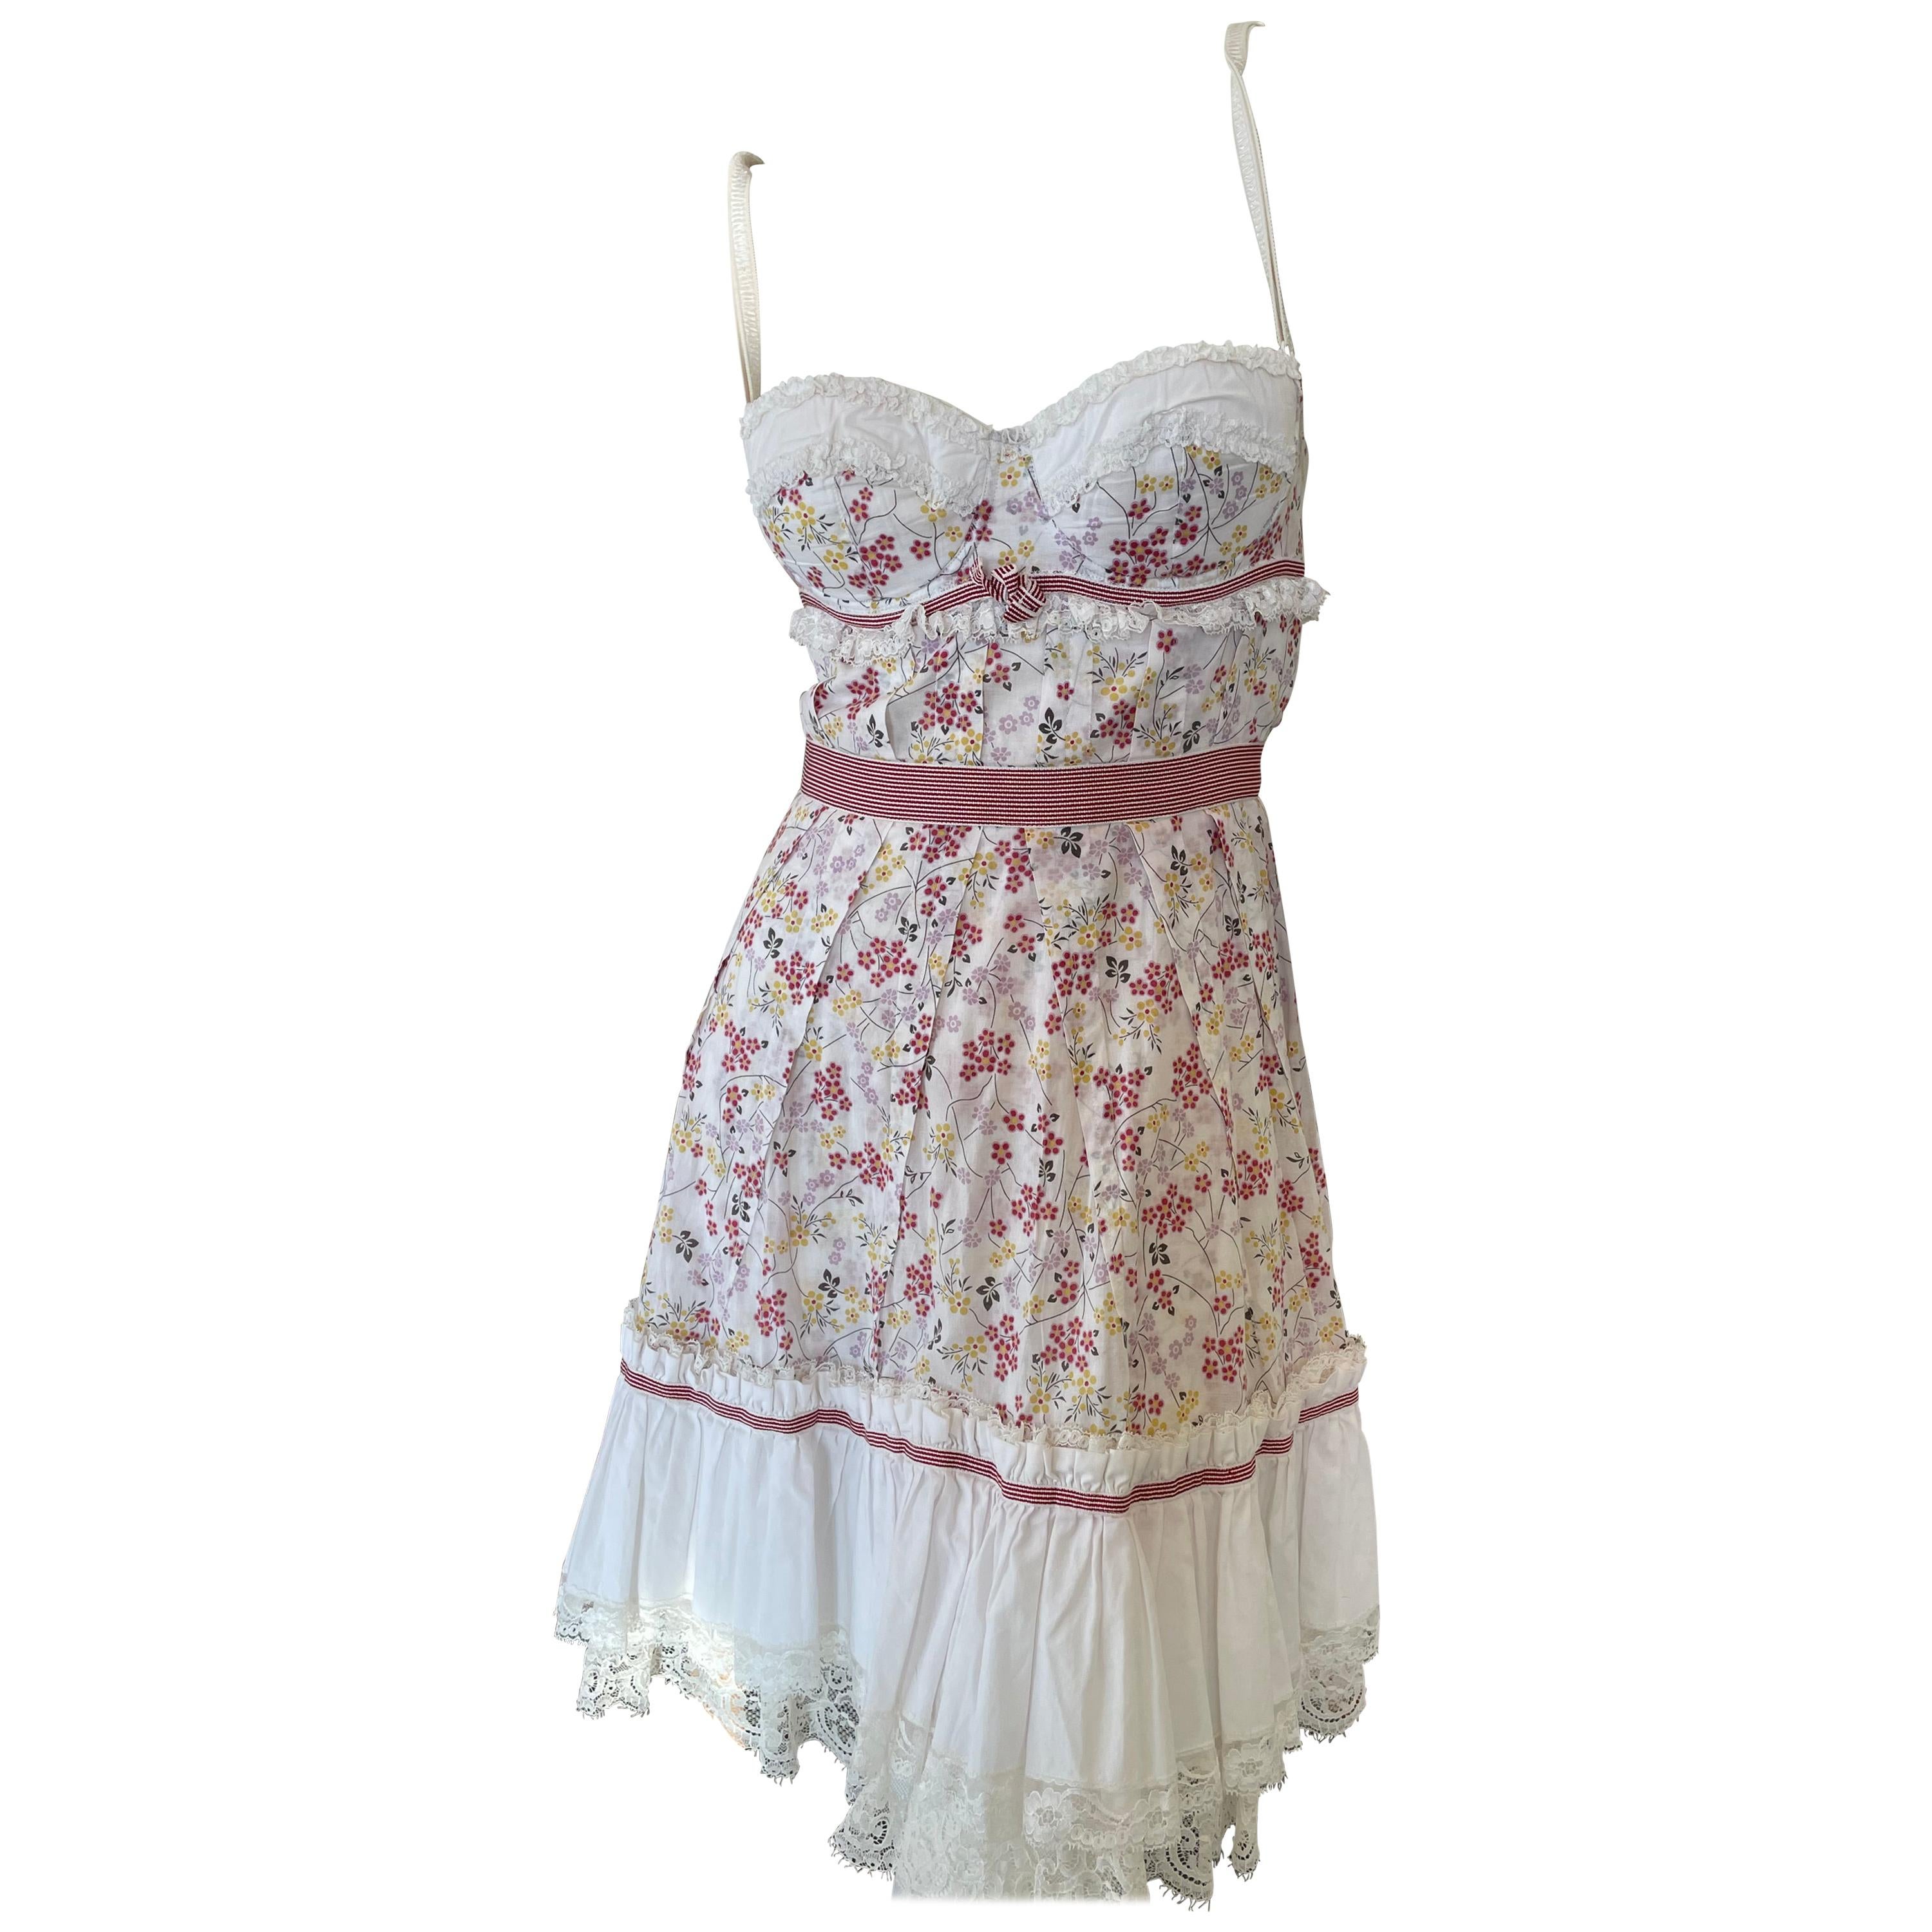 Dolce & Gabbana D&G Pink Lace Trim Floral Dress with Underwire Bra For Sale